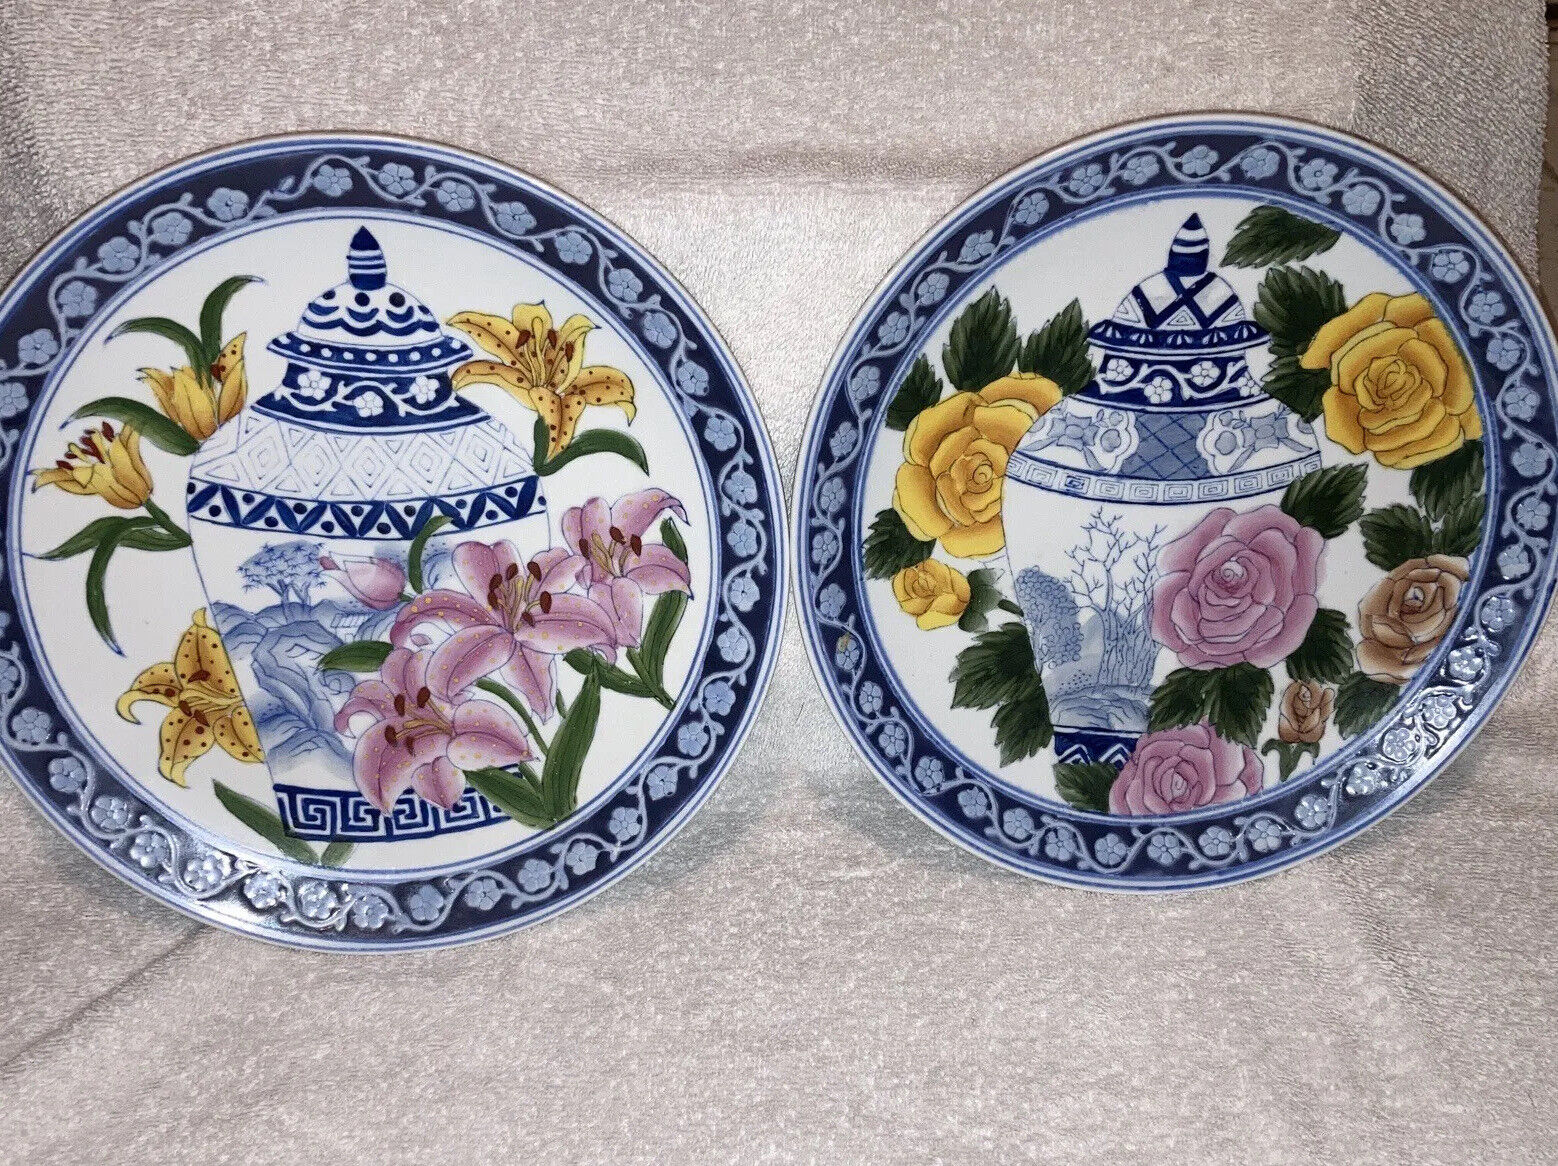 2 Porcelain Hand Painted Chinese Ginger Jar & Roses Decorative Plates 10.25 In